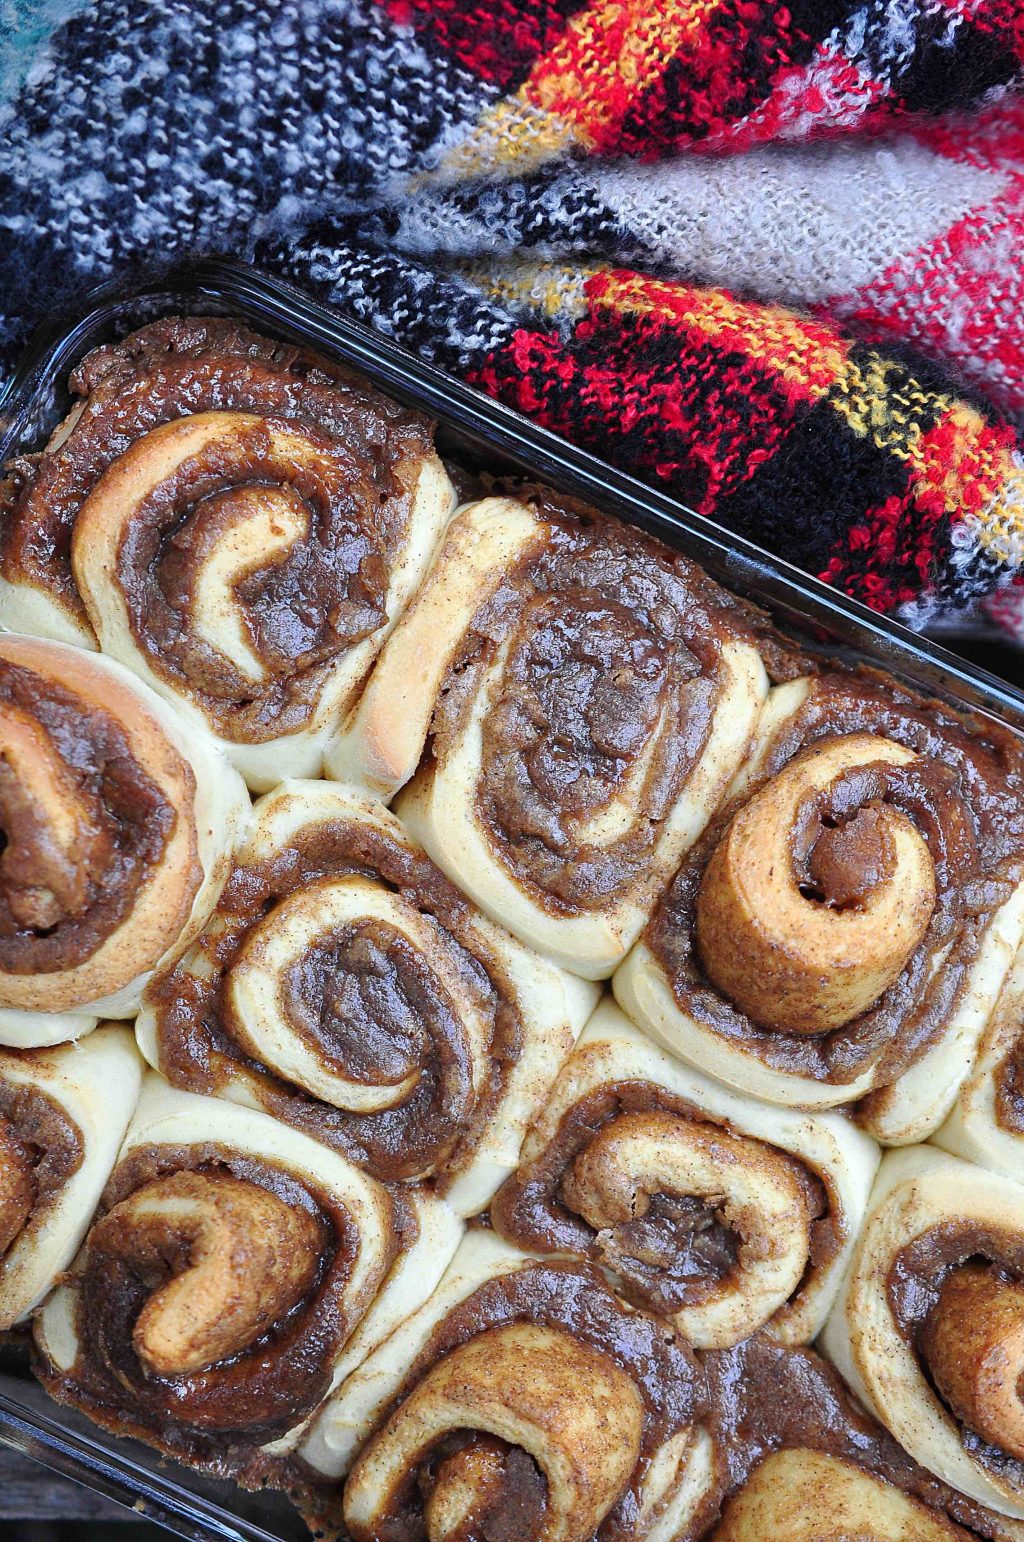 Snail-like rolls of golden brown dough bubbling over with a dark brown filling of sugary goo arranged in a baking tray with a red and green and black checked blanket nestled against the baking tray. Set at an angle.